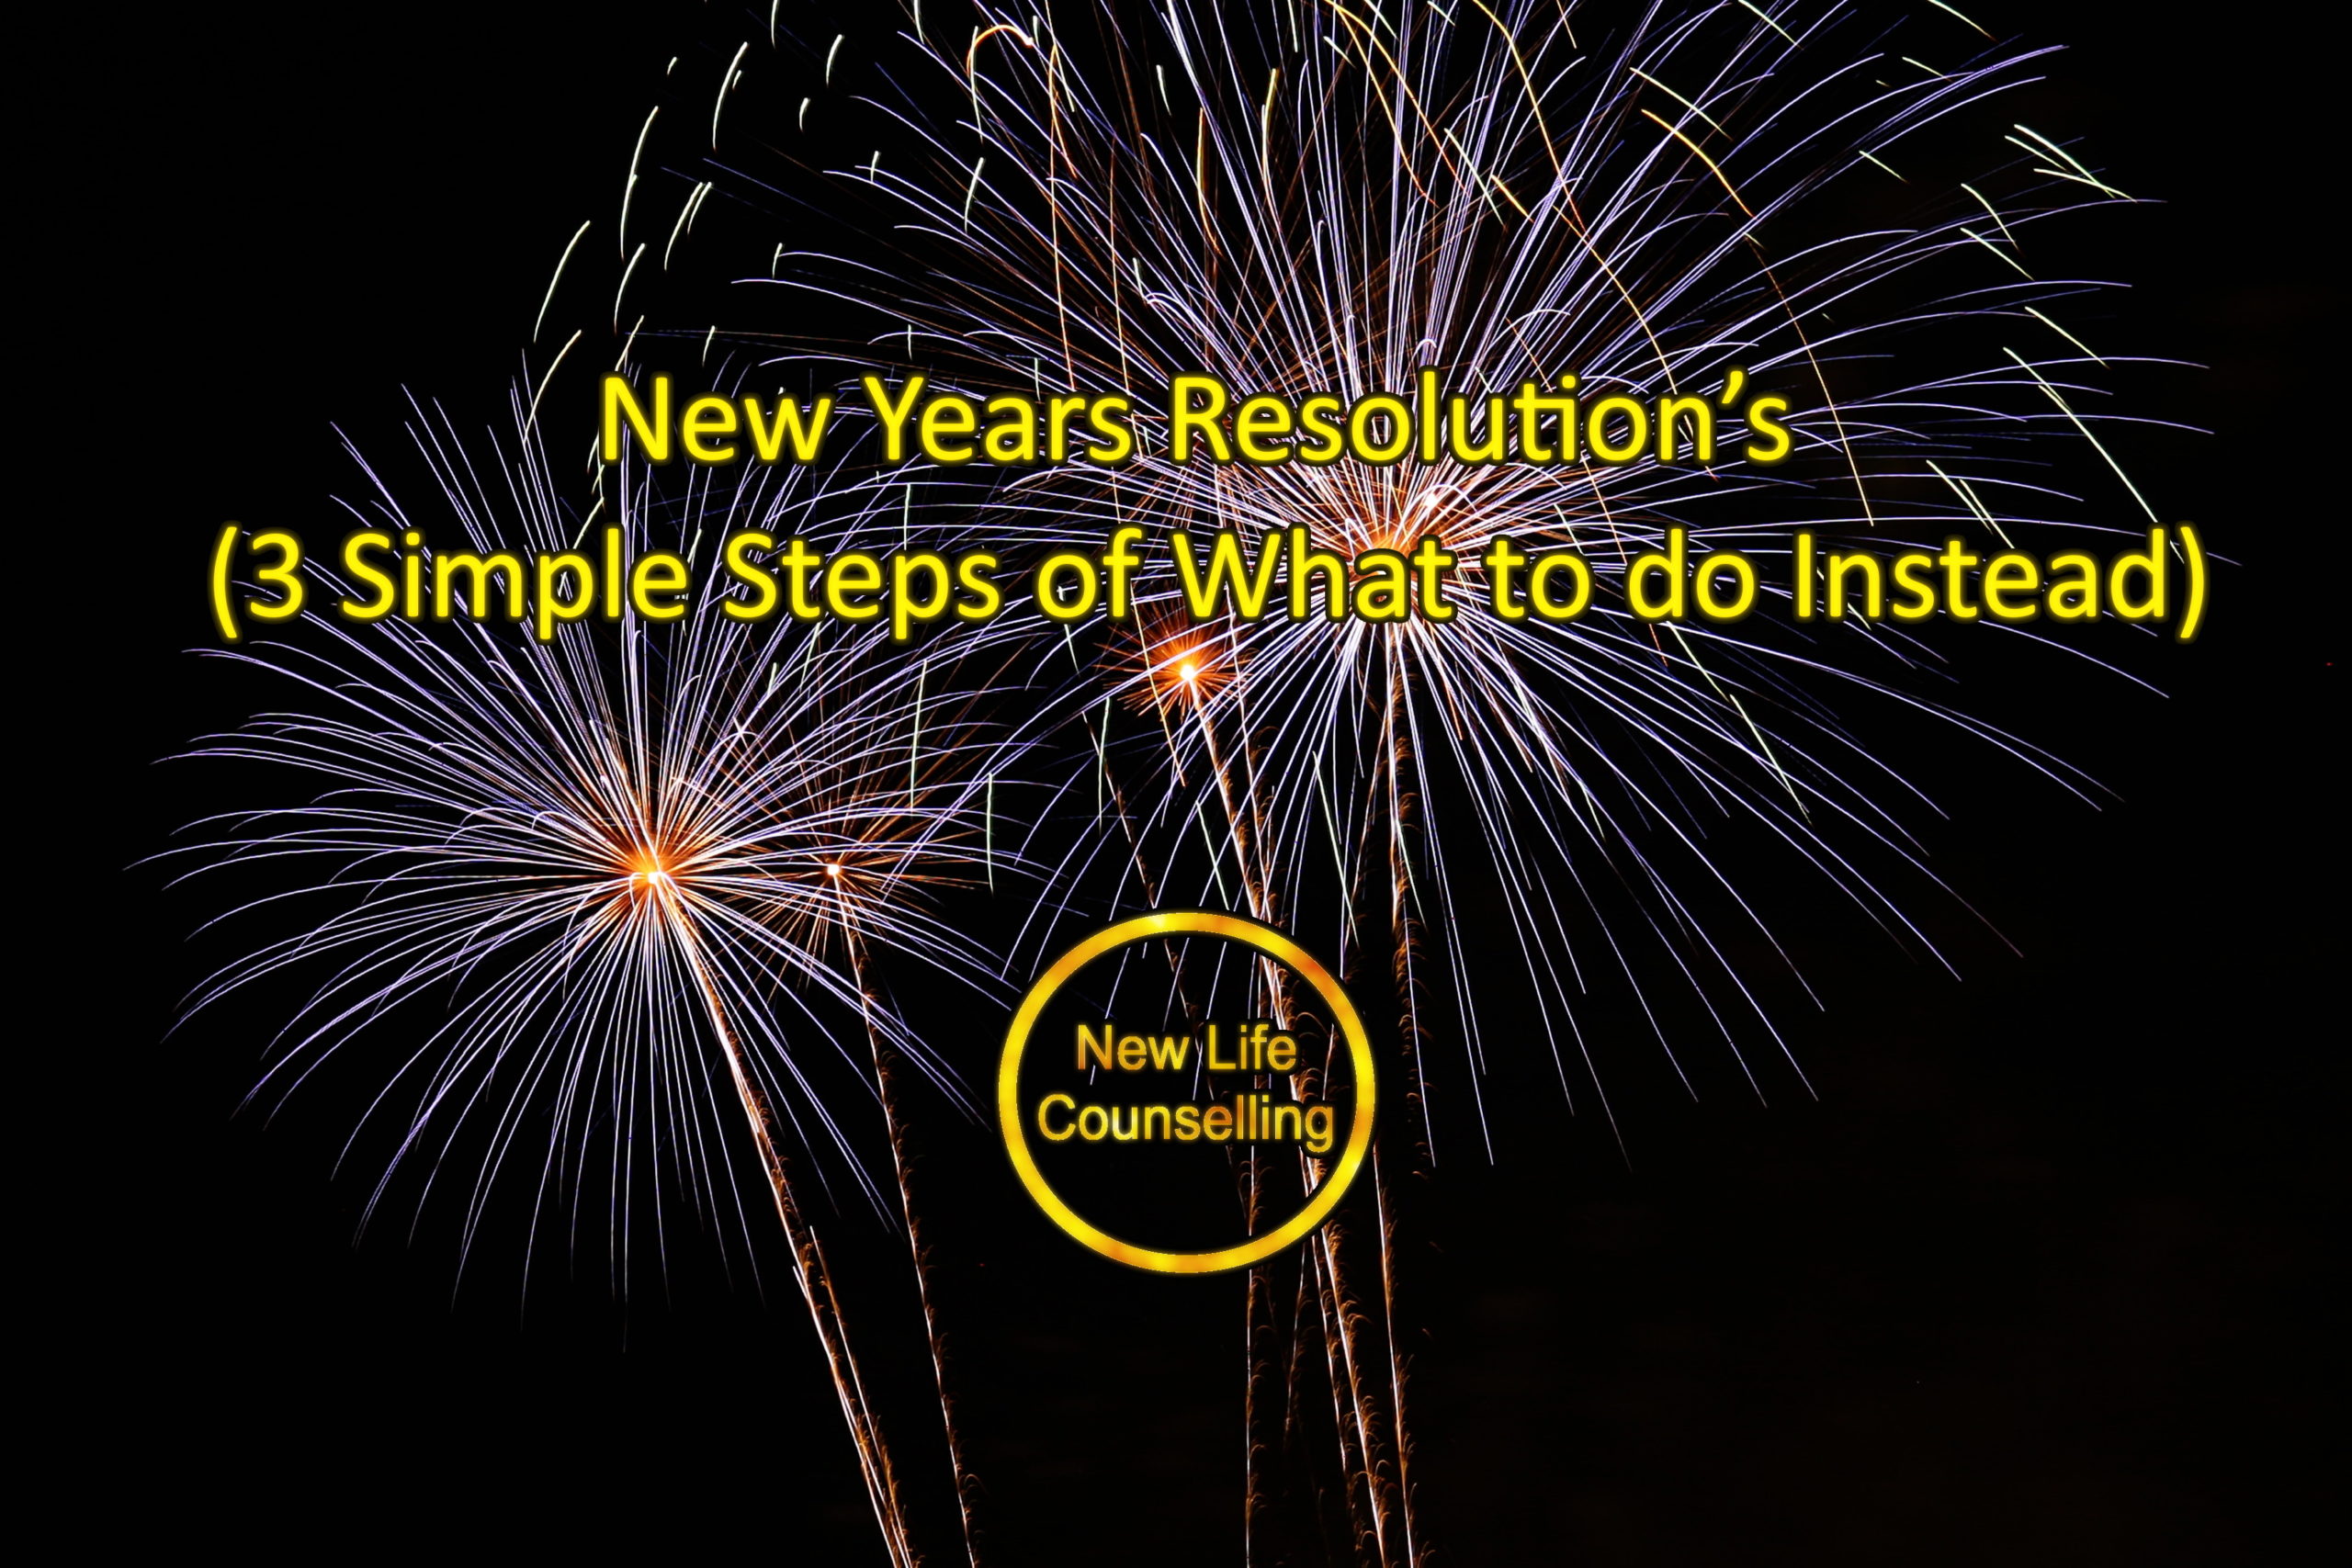 You are currently viewing New Years Resolution’s (3 Simple Steps of What to do Instead)